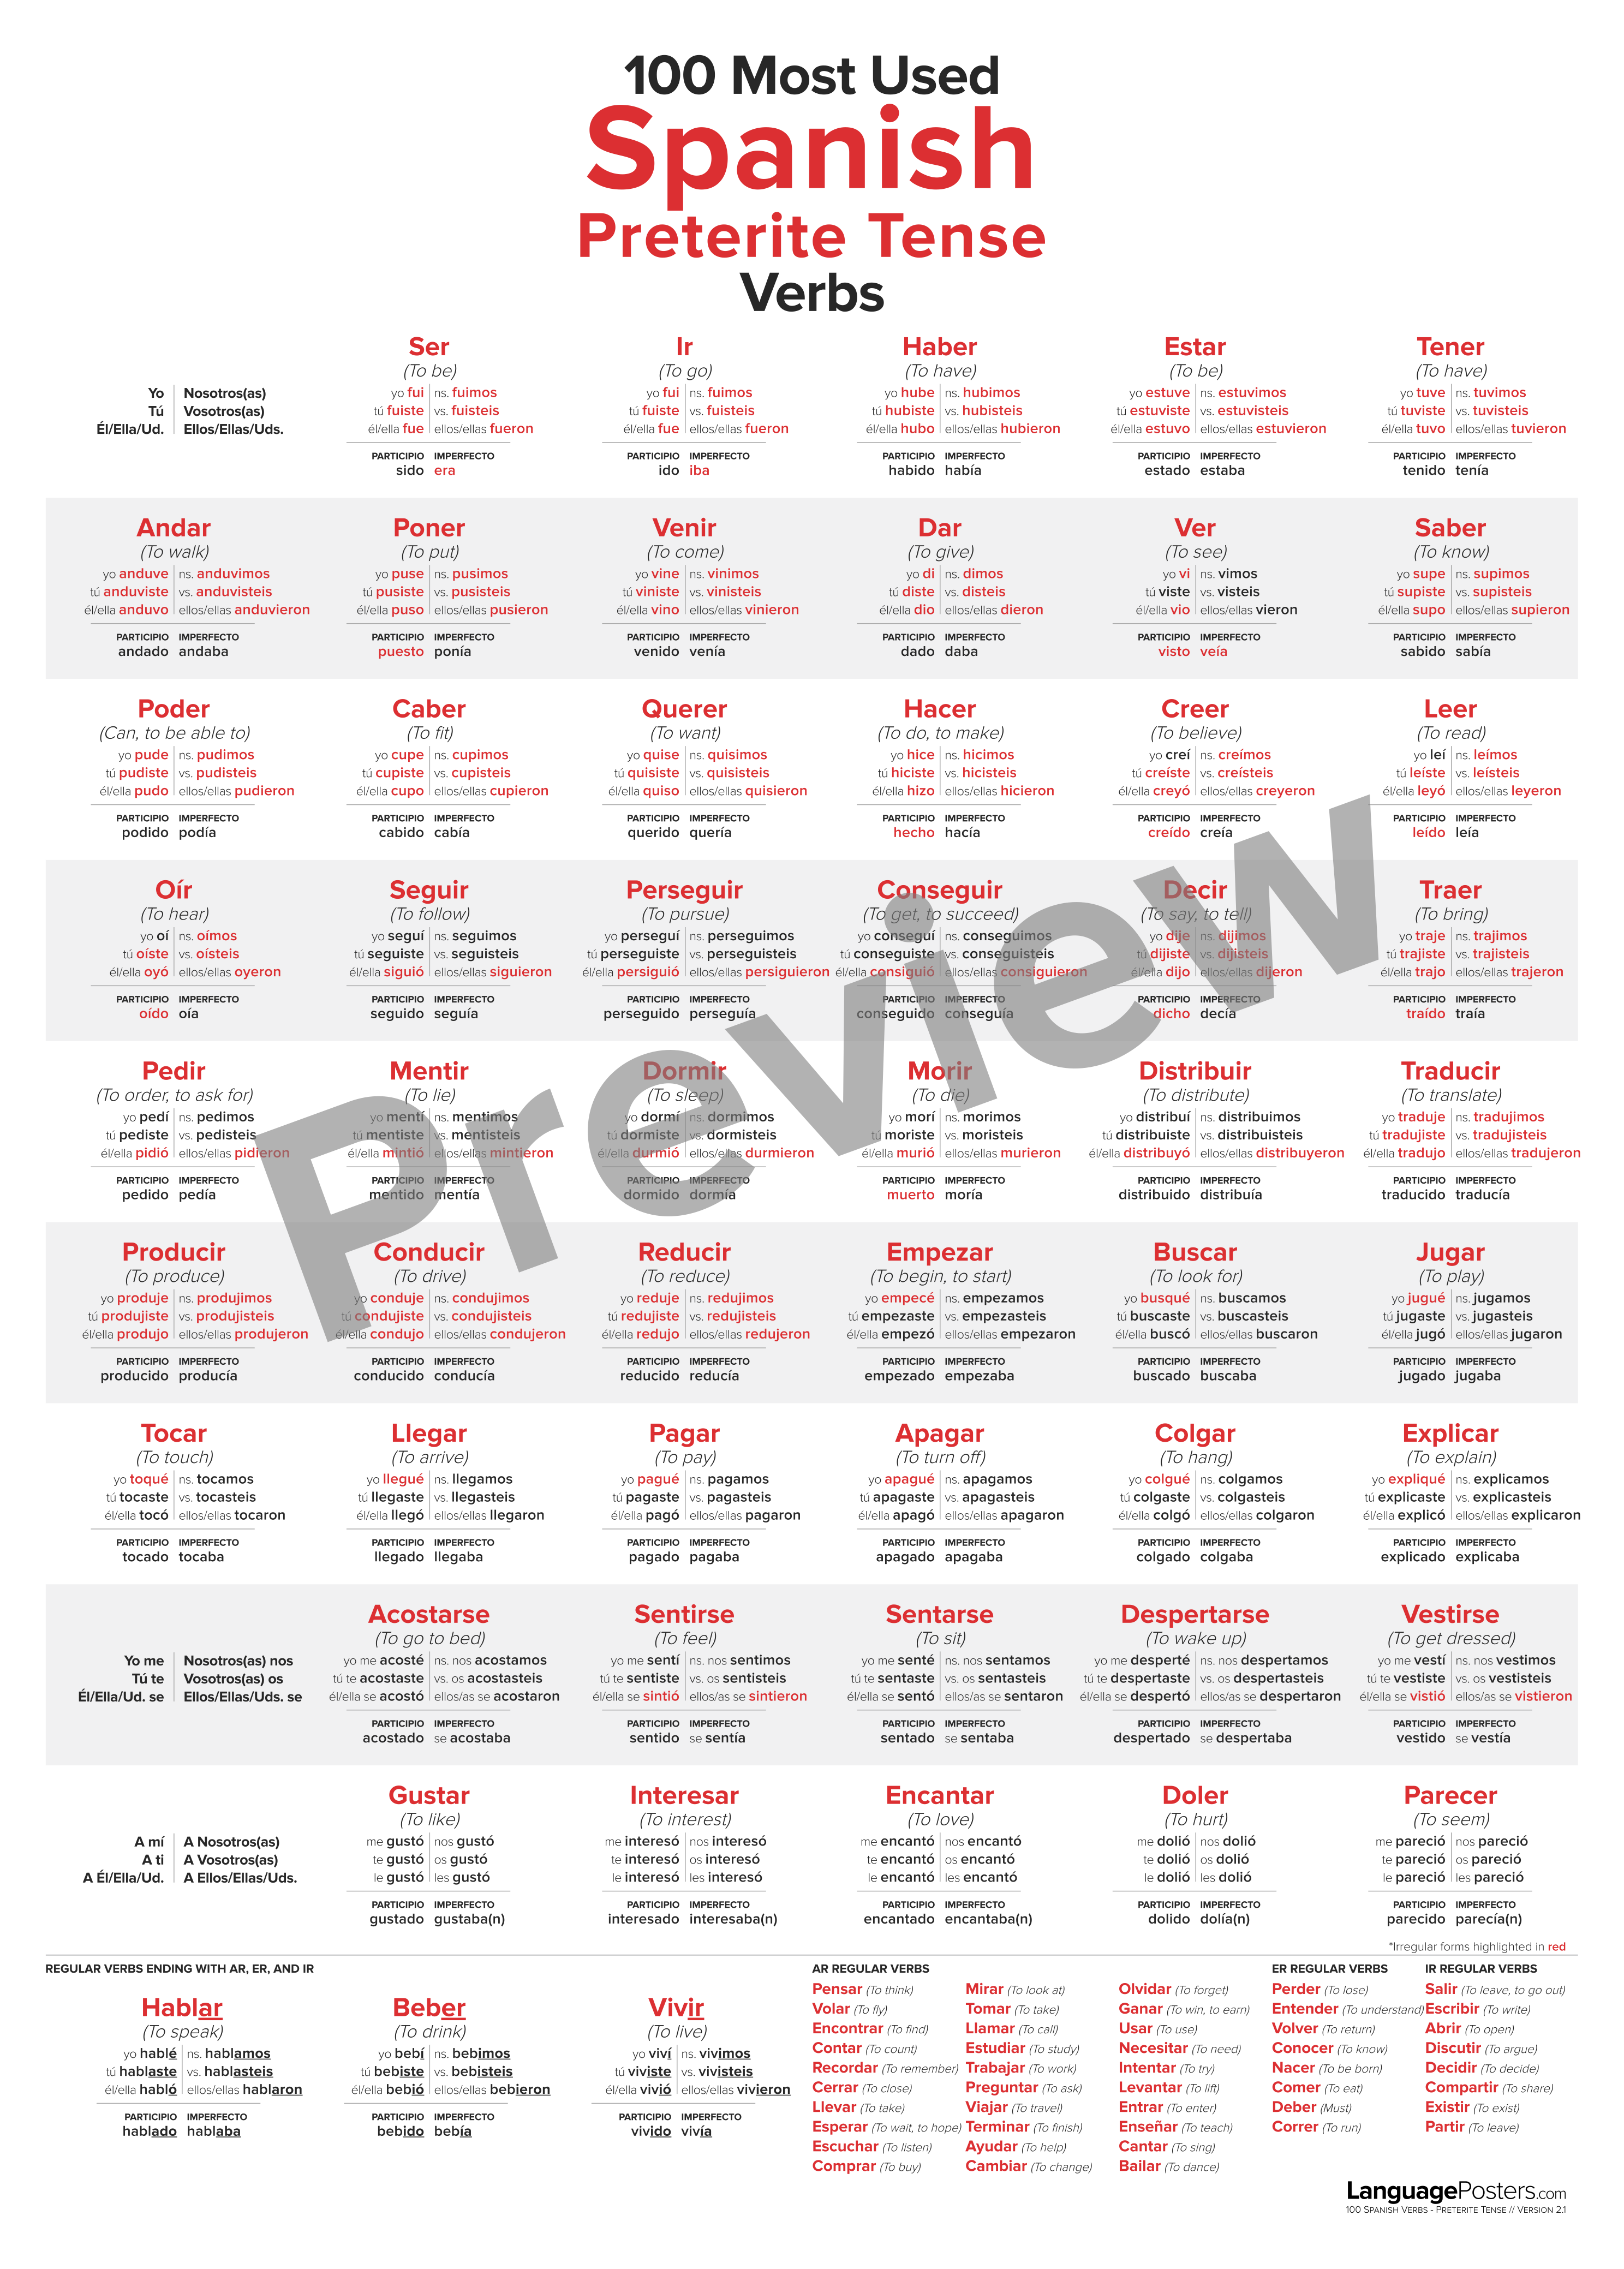 100-most-used-spanish-preterite-past-tense-verbs-poster-w-study-gui-languageposters